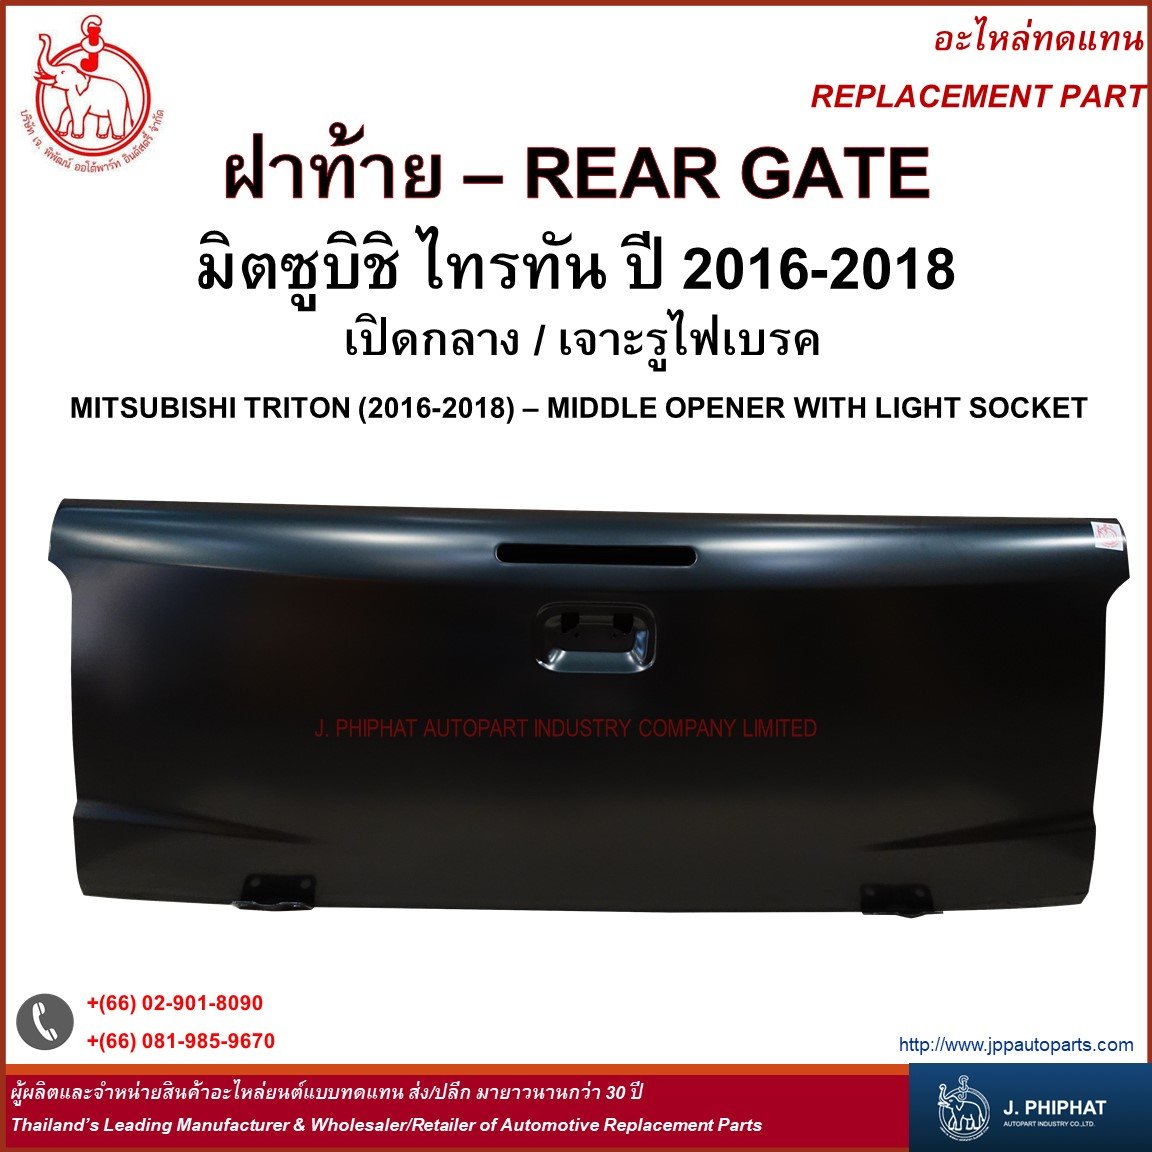 Rear Gate for Mitsubishi TRITON '16-18 Middle Opener with light sockets